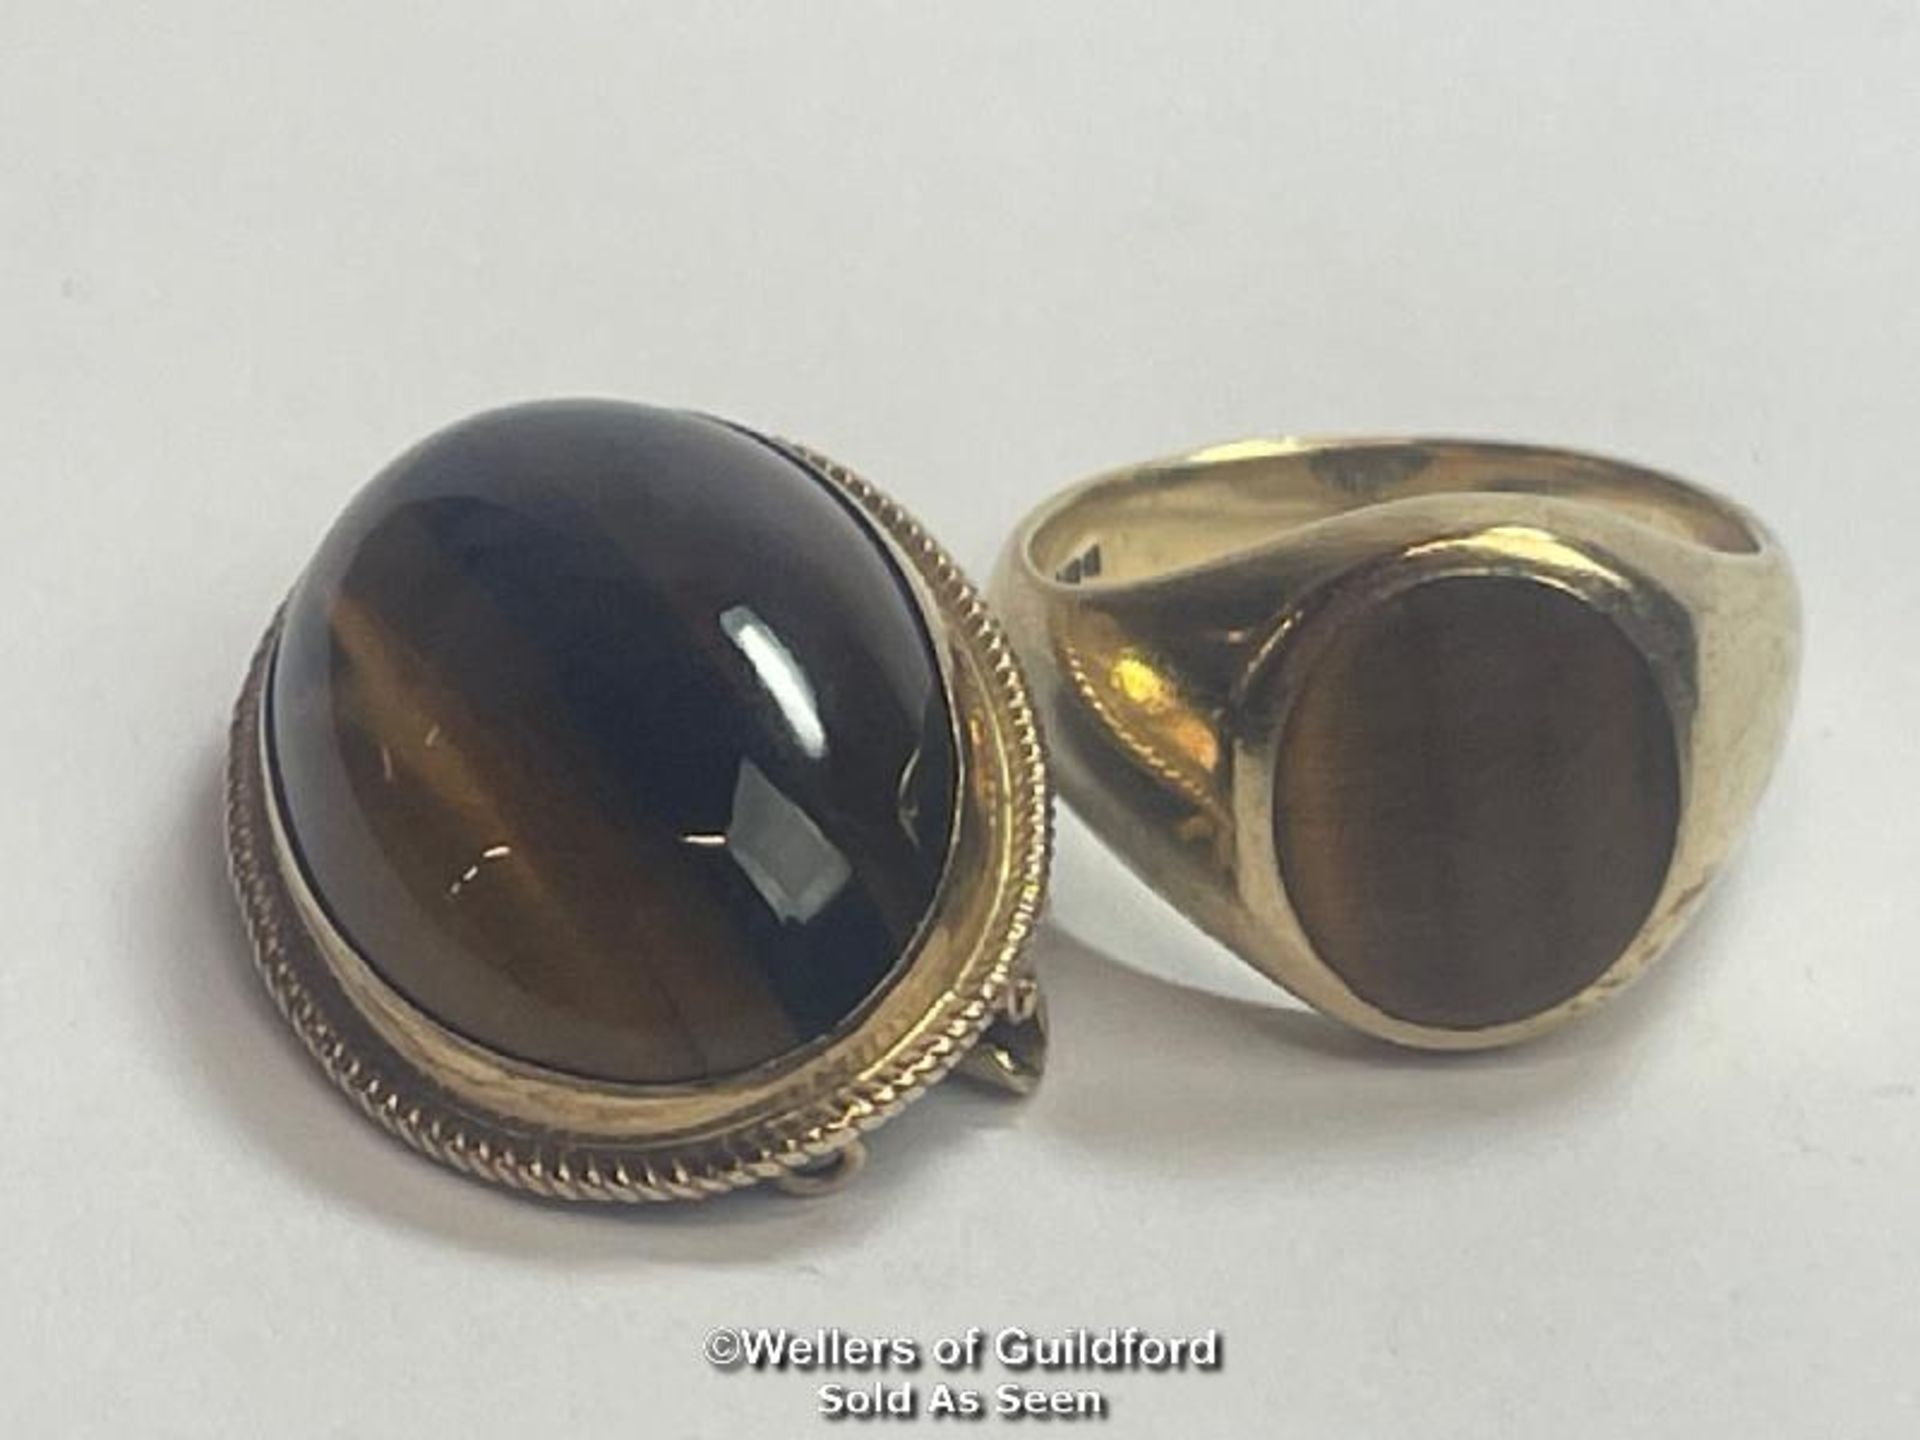 A Tiger's eye signet ring in 9ct gold, hallmarked London 2004, ring size S, weight 7.81g with